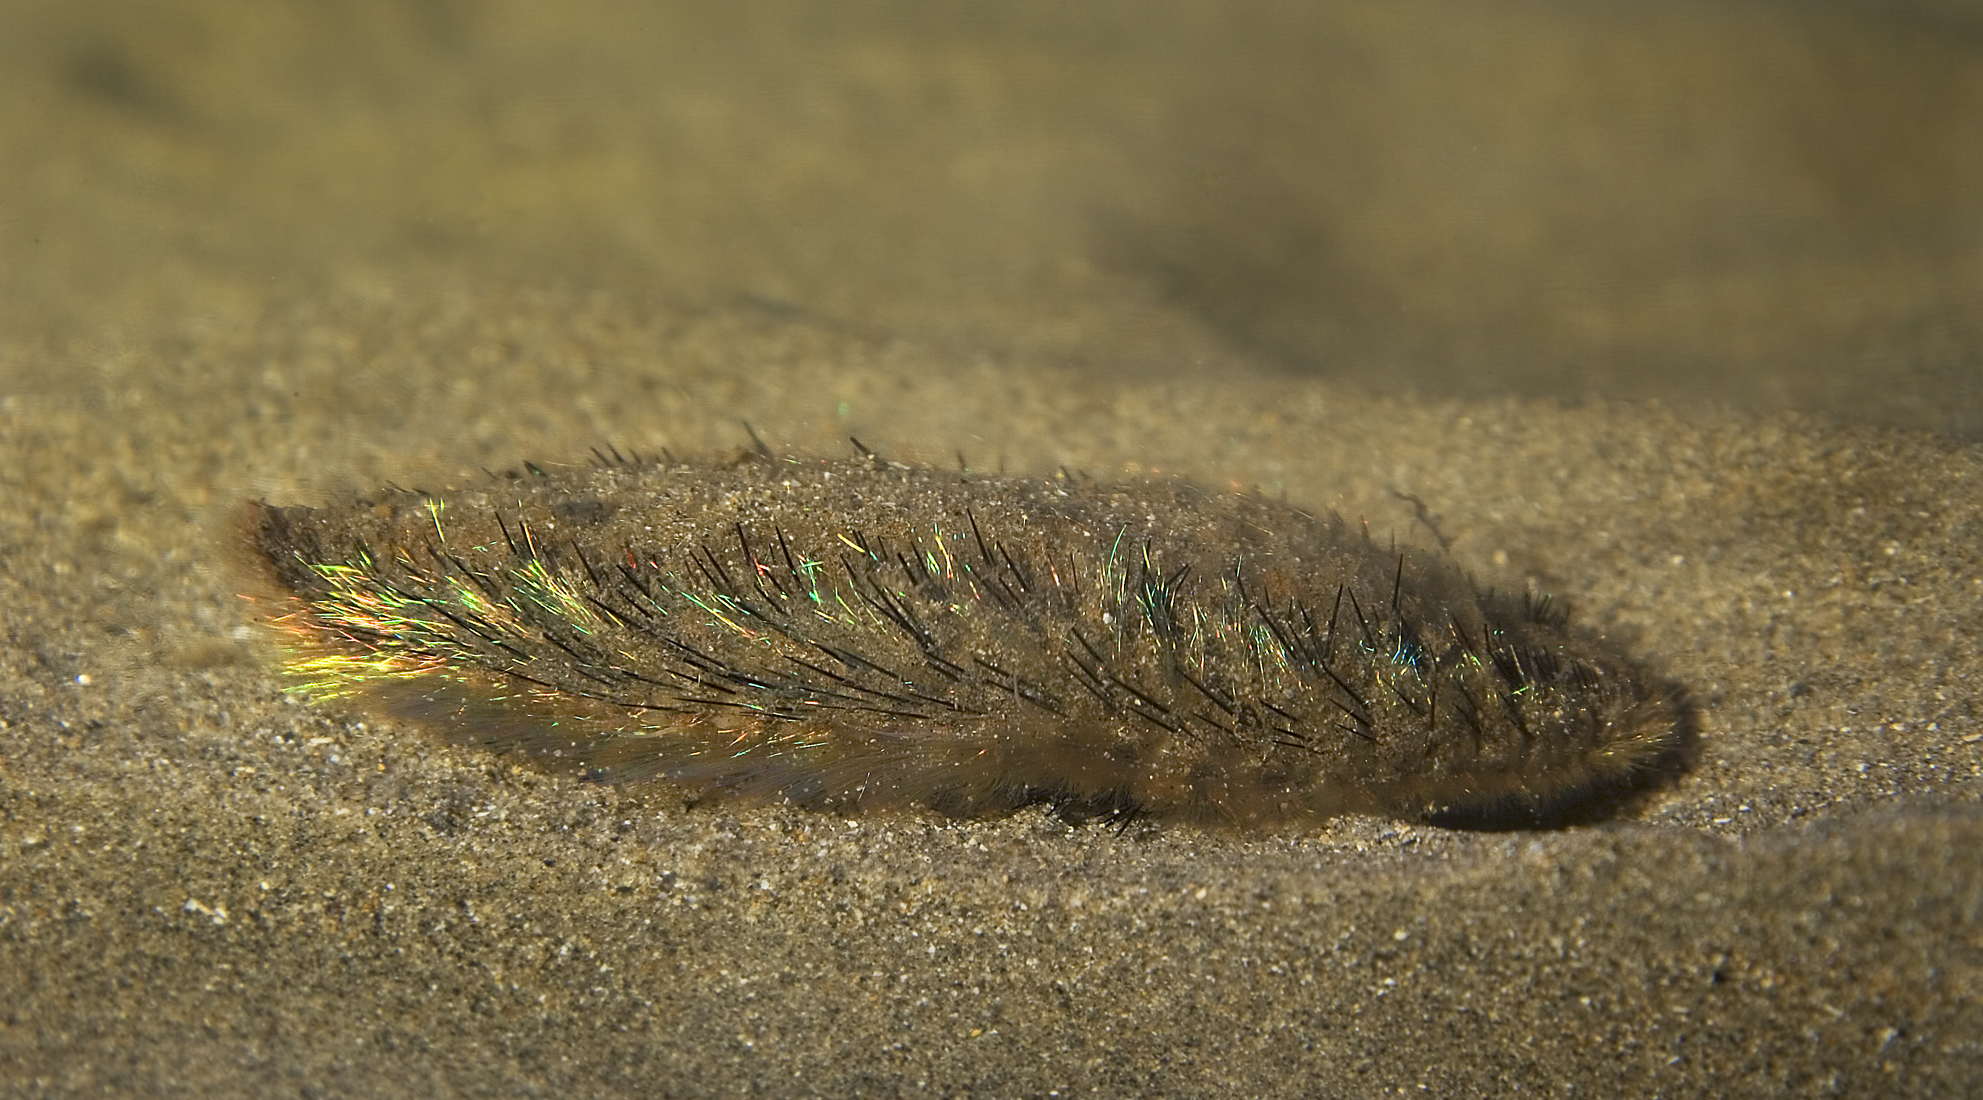 "Aphrodita aculeata (Sea mouse)" by MichaelMaggs - Licensed under CC BY-SA 3.0 via Wikimedia Commons